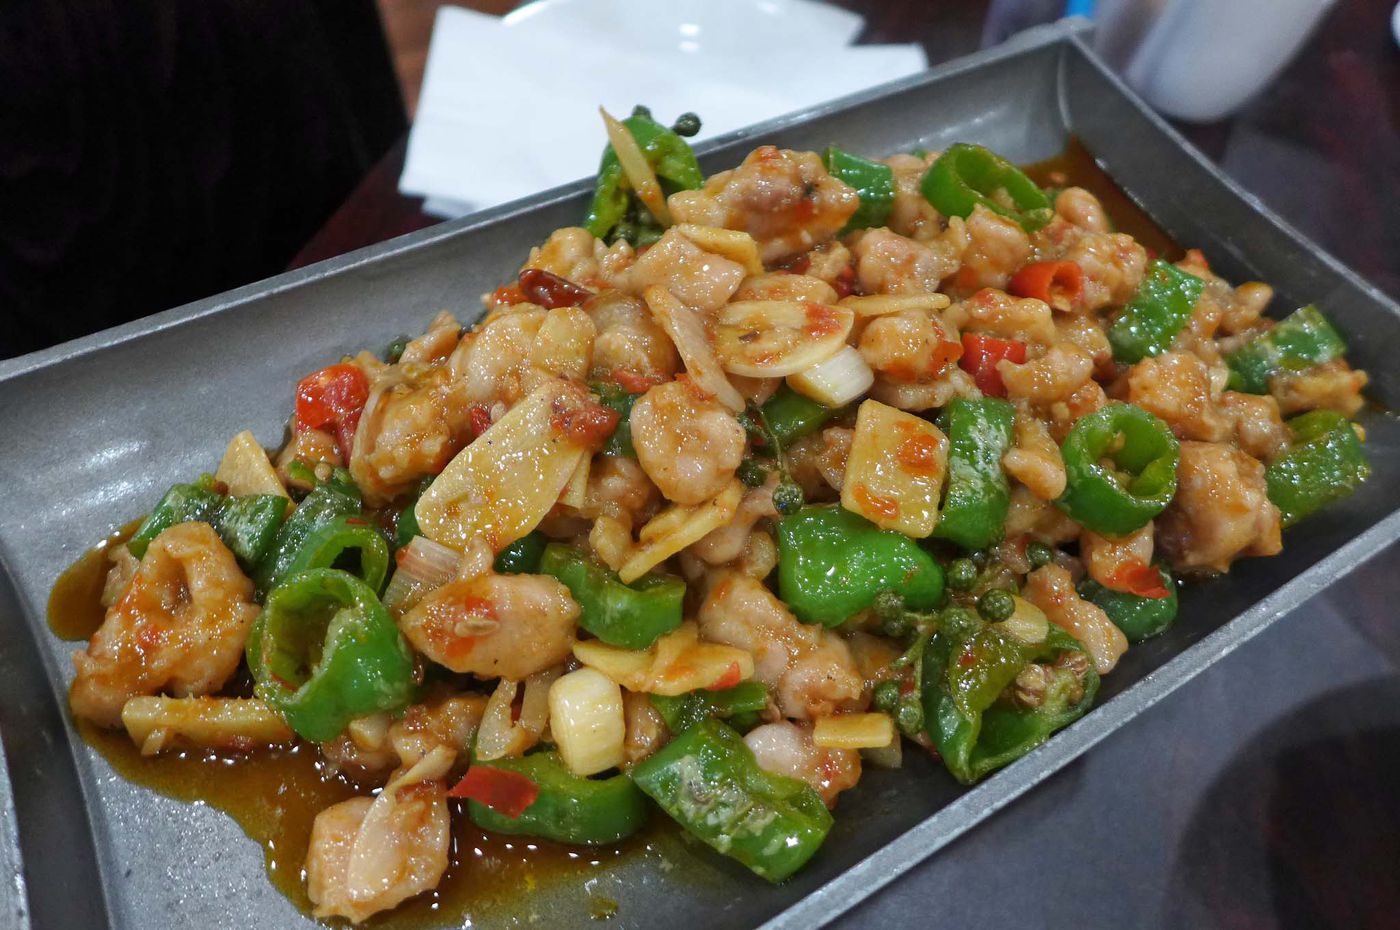 one of manhattan’s most ambitious sichuan chefs is back in business